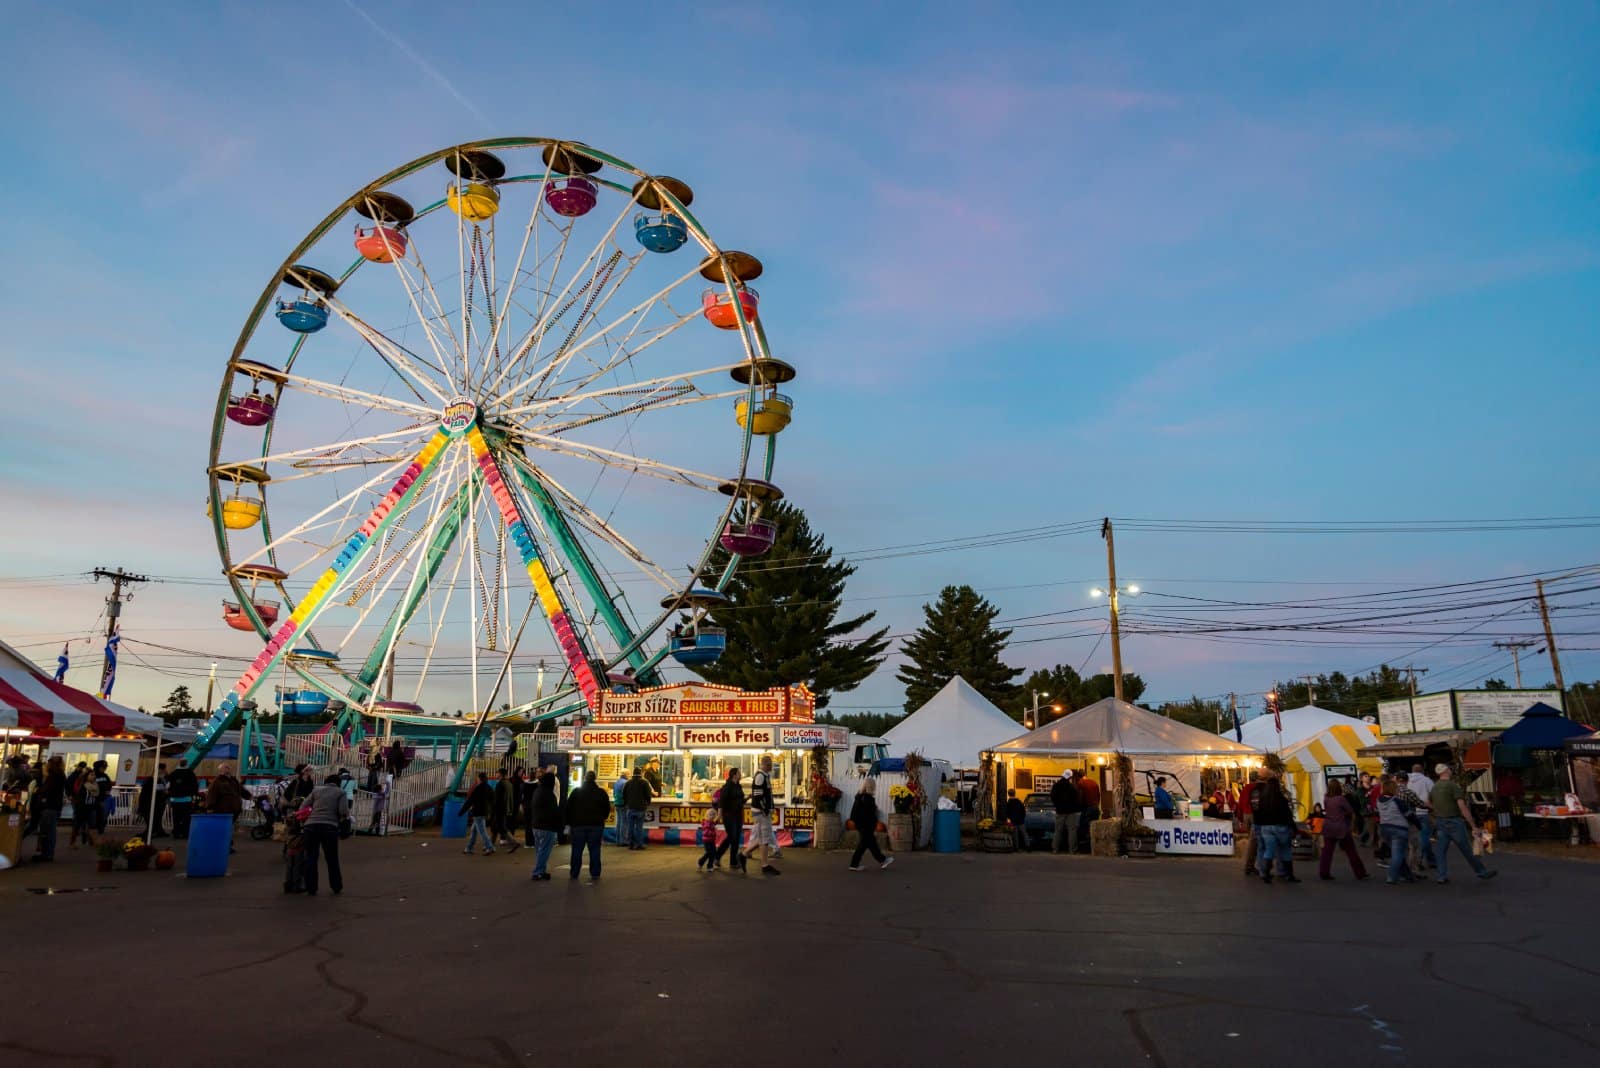 <p class="wp-caption-text">Image Credit: Shutterstock / Enrico Della Pietra</p>  <p>Don’t miss Maine’s largest agricultural fair, the Fryeburg Fair, for a taste of local life, from livestock shows to carnival rides. It’s a family affair with something for everyone at a price that won’t break the bank.</p>